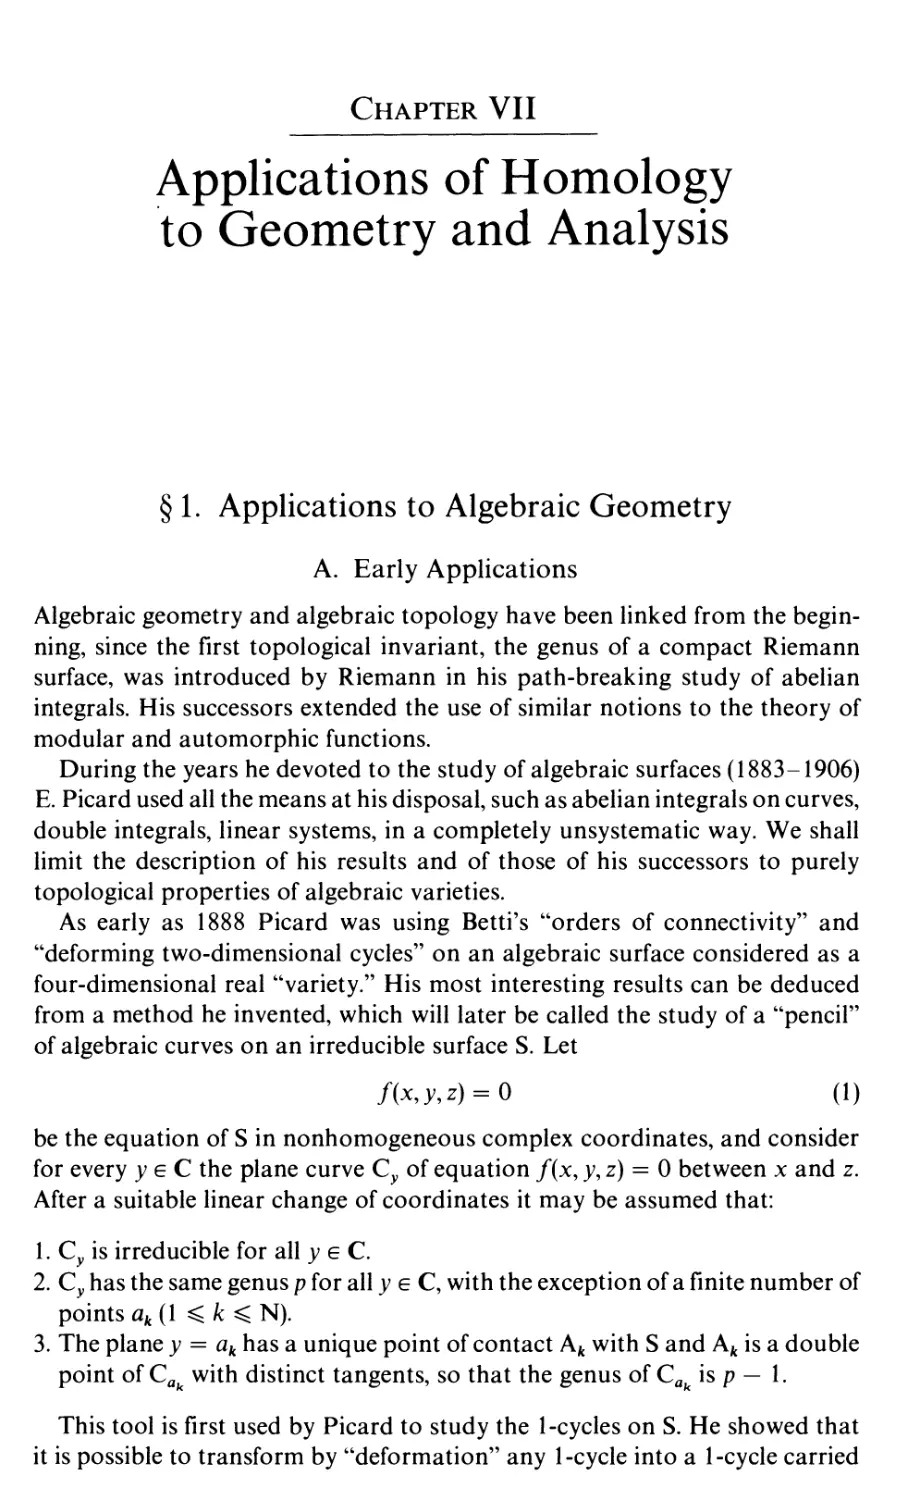 Chapter VII. Applications of Homology to Geometry and Analysis